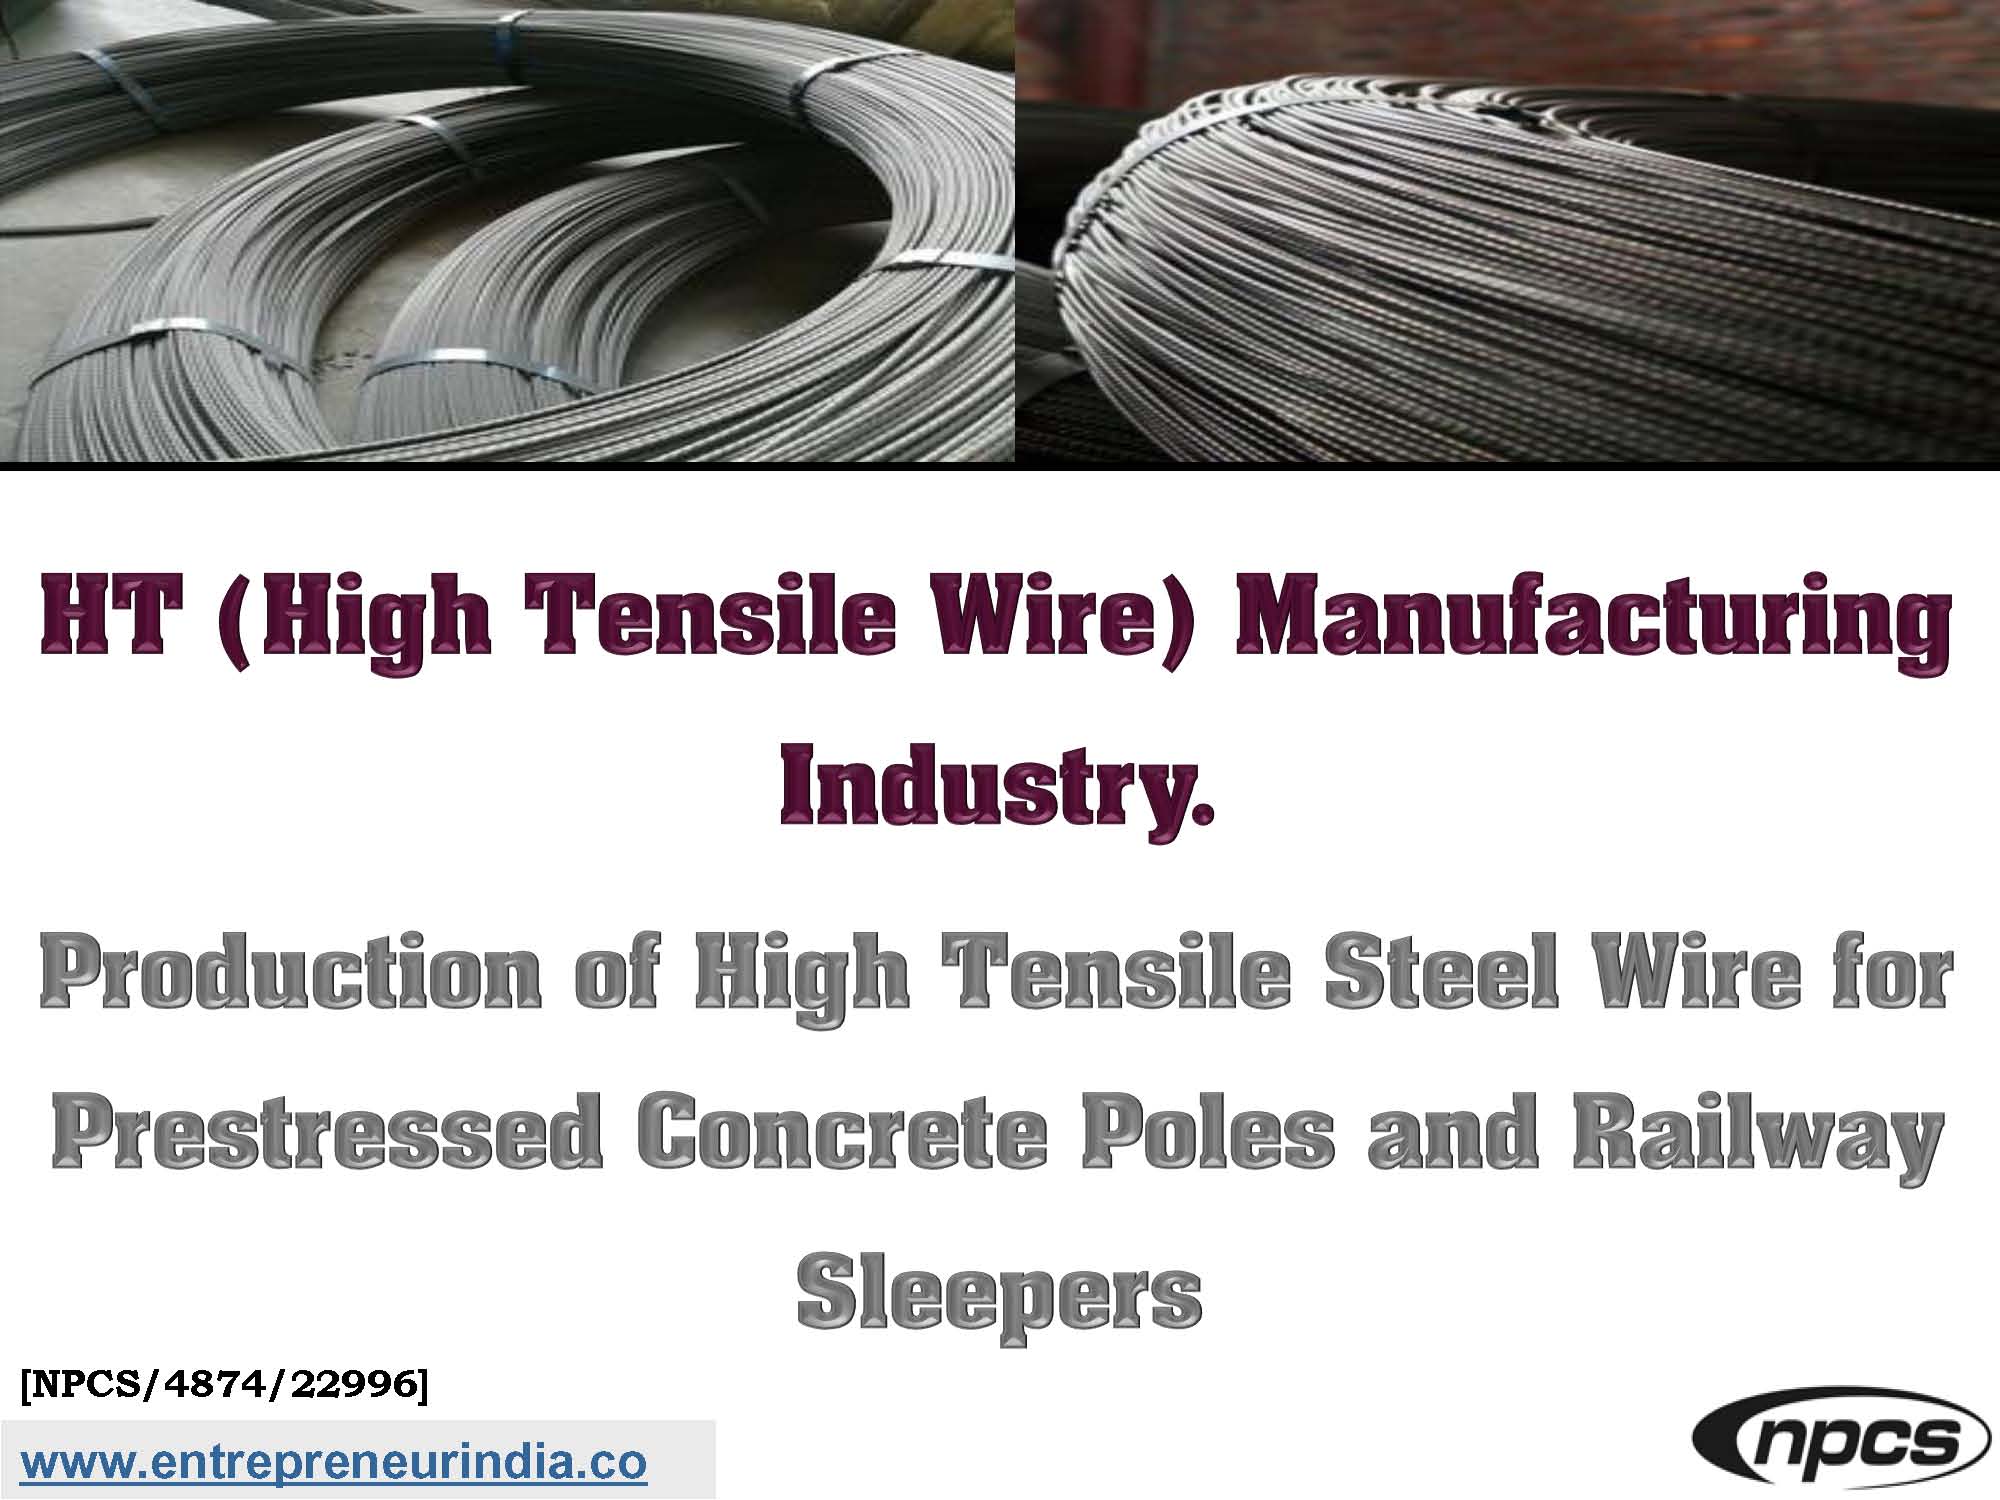 HT (High Tensile Wire) Manufacturing Industry